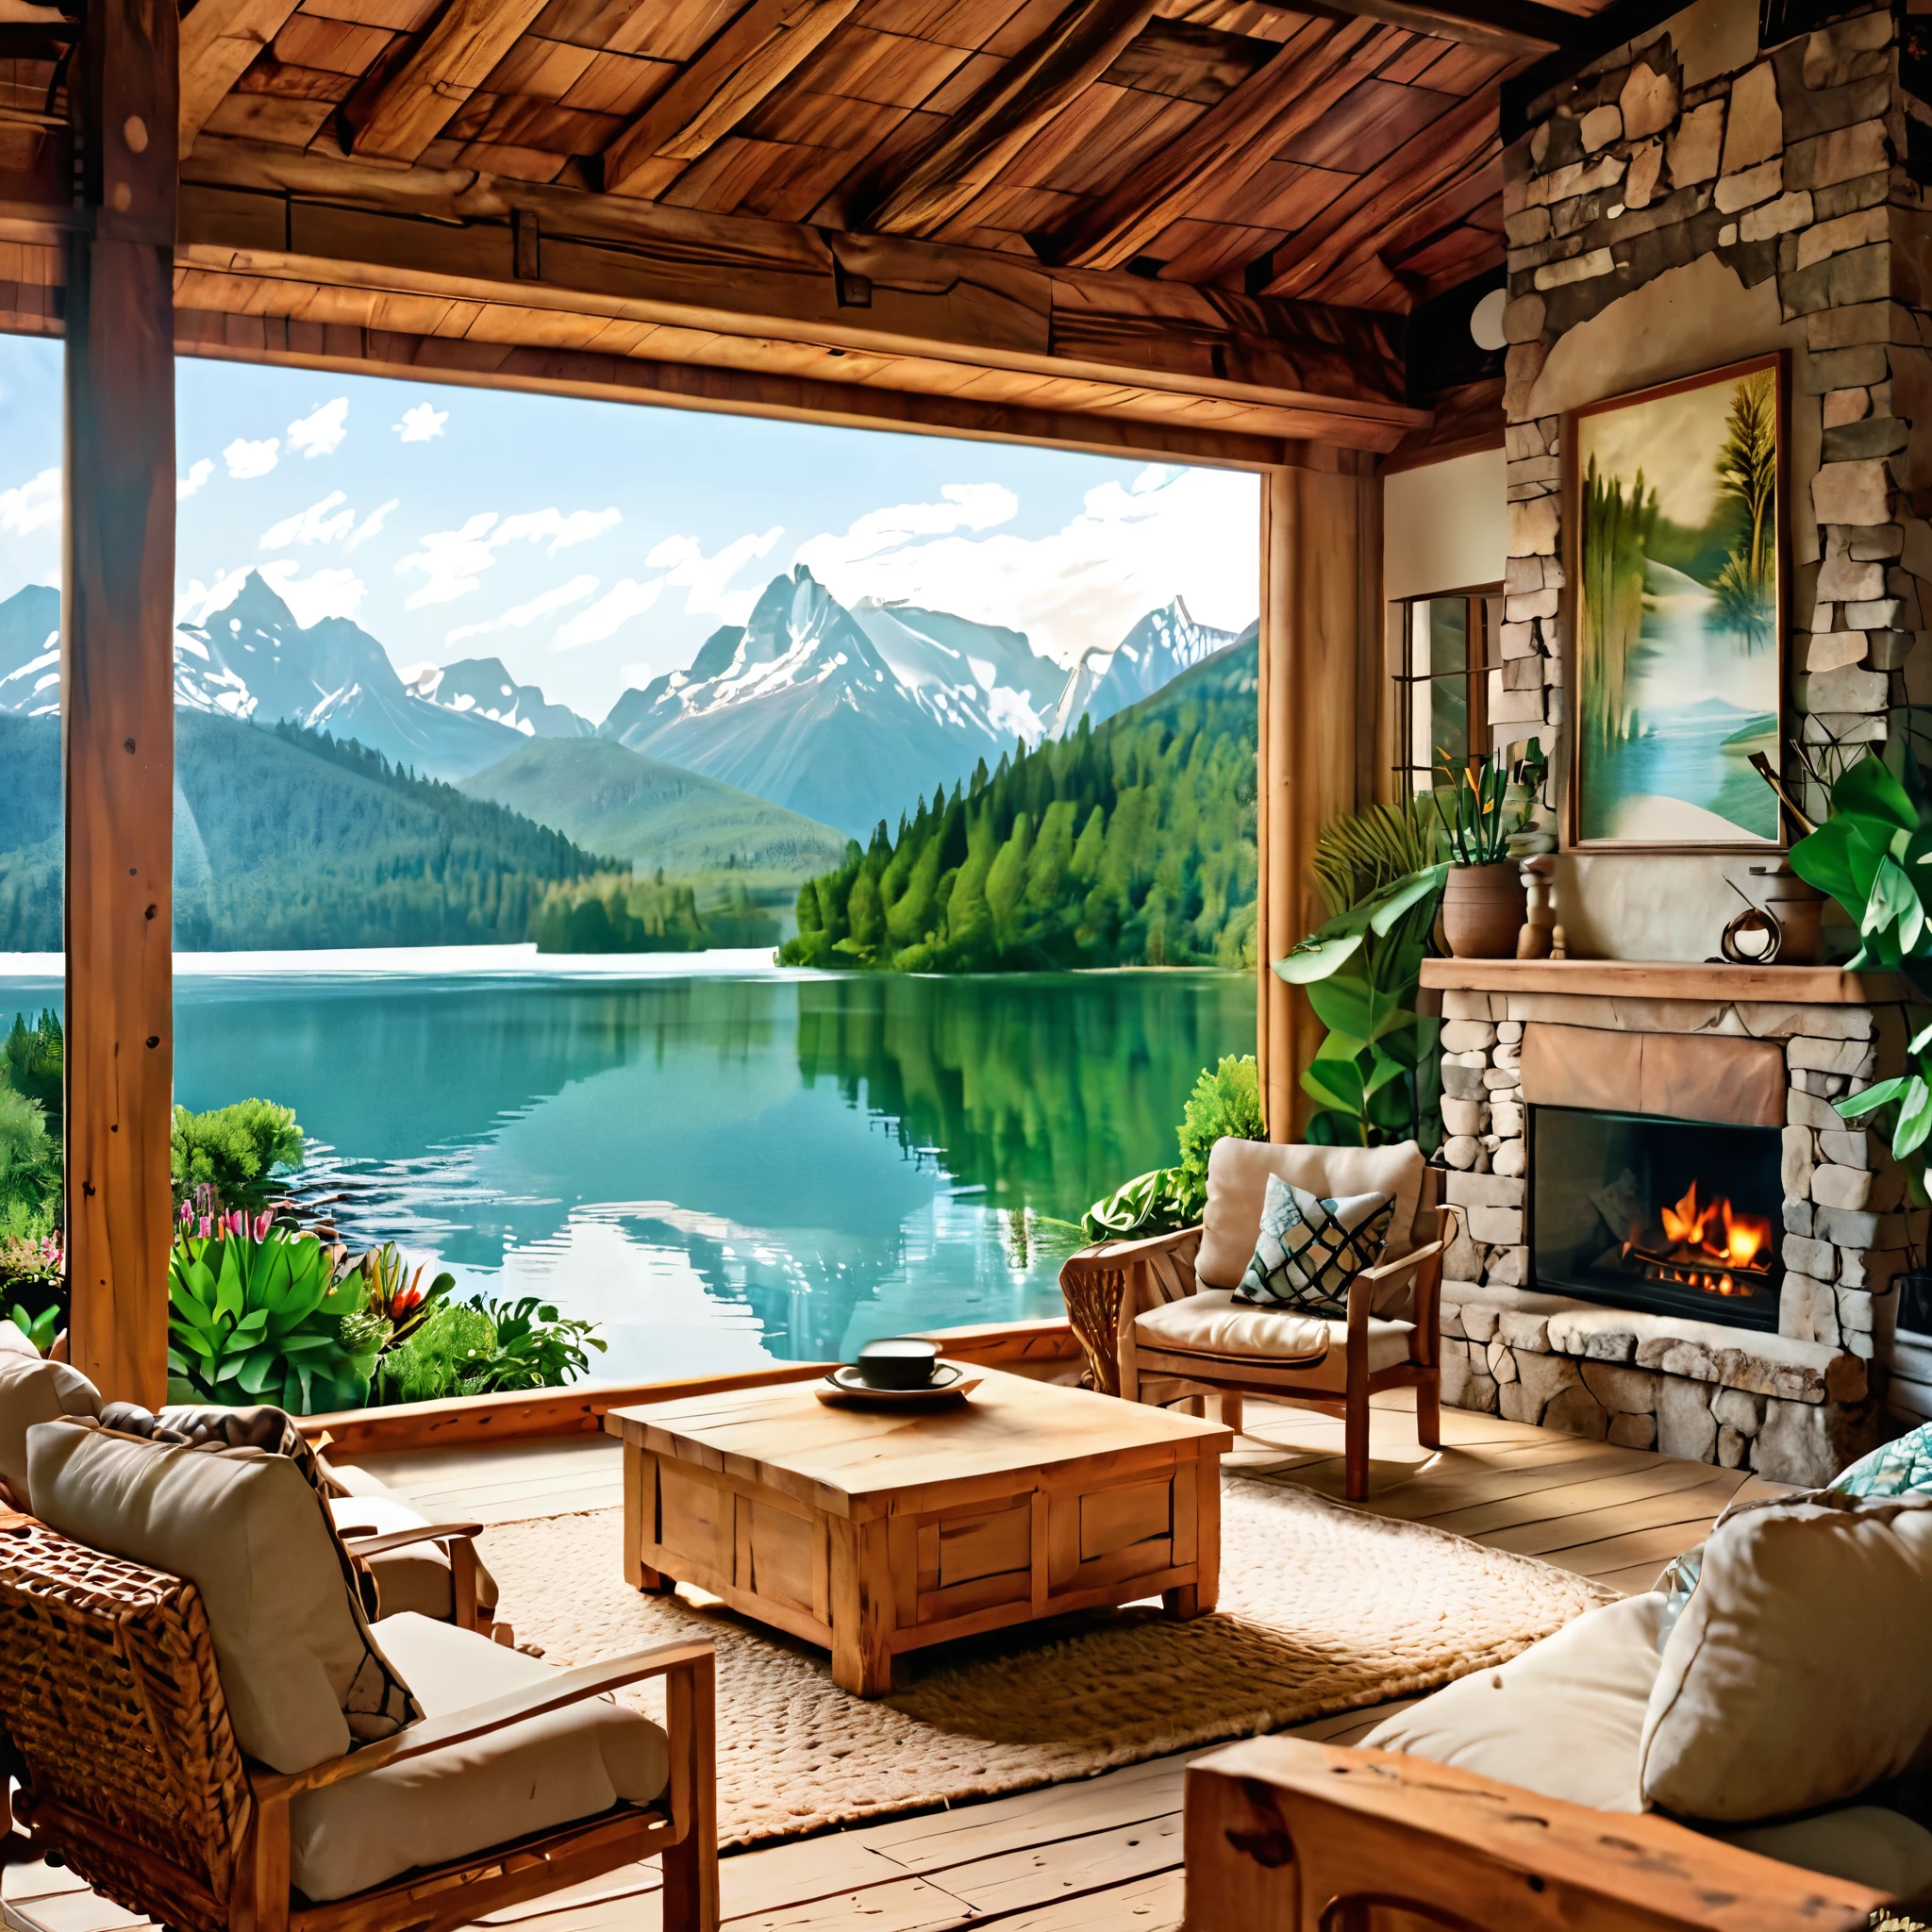 A cozy and rustic living room with an expansive view of a tranquil mountain lake. The room is furnished with comfortable wicker chairs, soft cushions, and a wooden coffee table. The design includes earthy tones, natural materials, and indoor plants, creating a warm and inviting atmosphere that blends seamlessly with the stunning outdoor scenery.